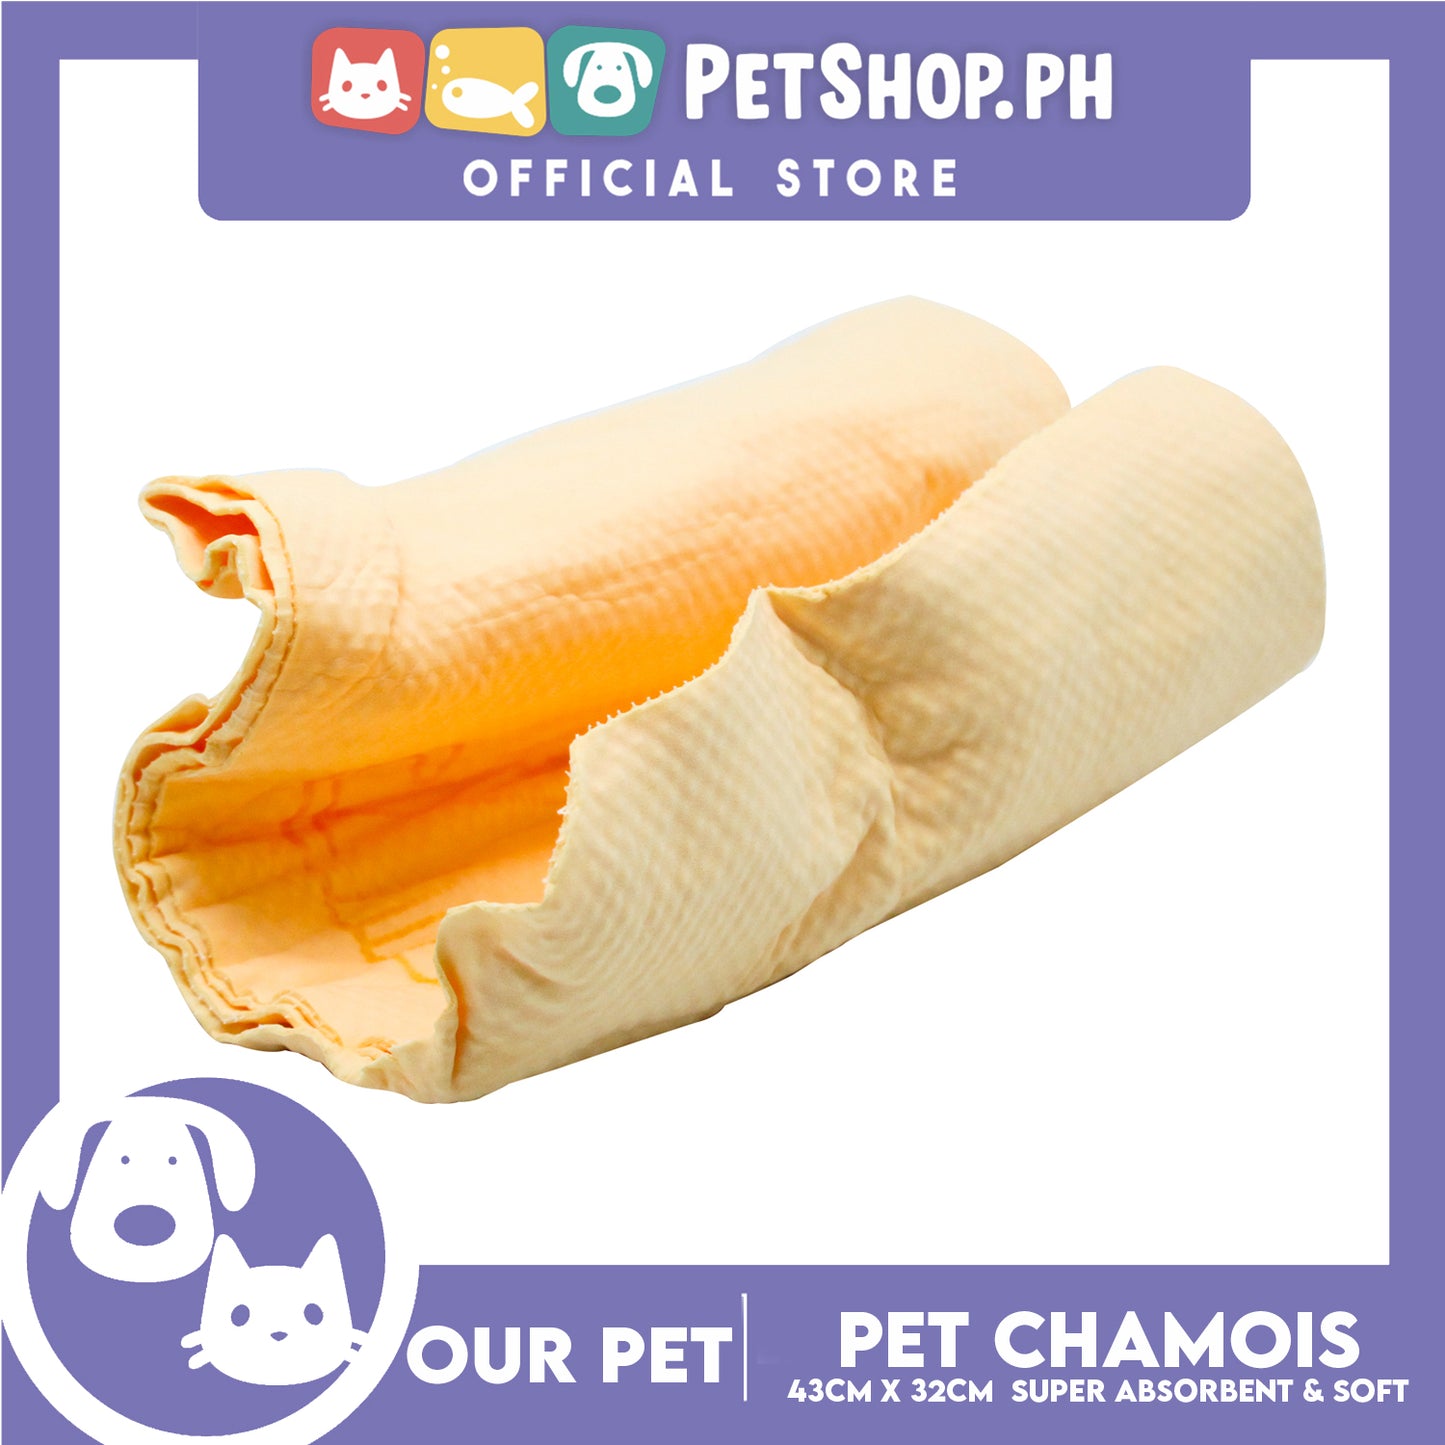 Our Pet Chamois